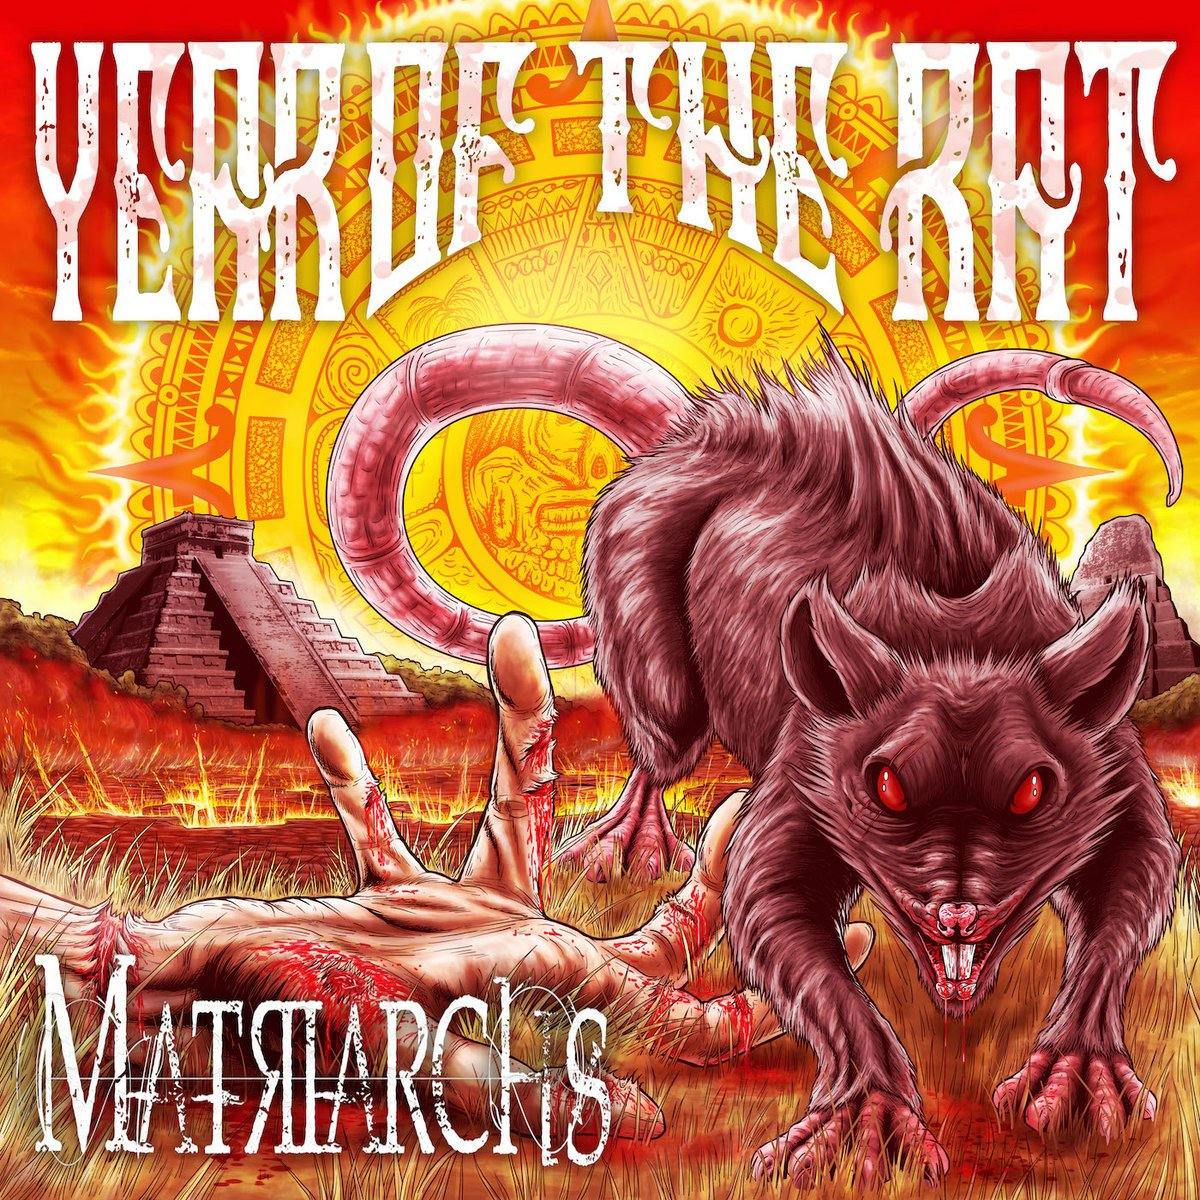 Buy – Matriarchs "Year of The Rat" CD – Band & Music Merch – Cold Cuts Merch